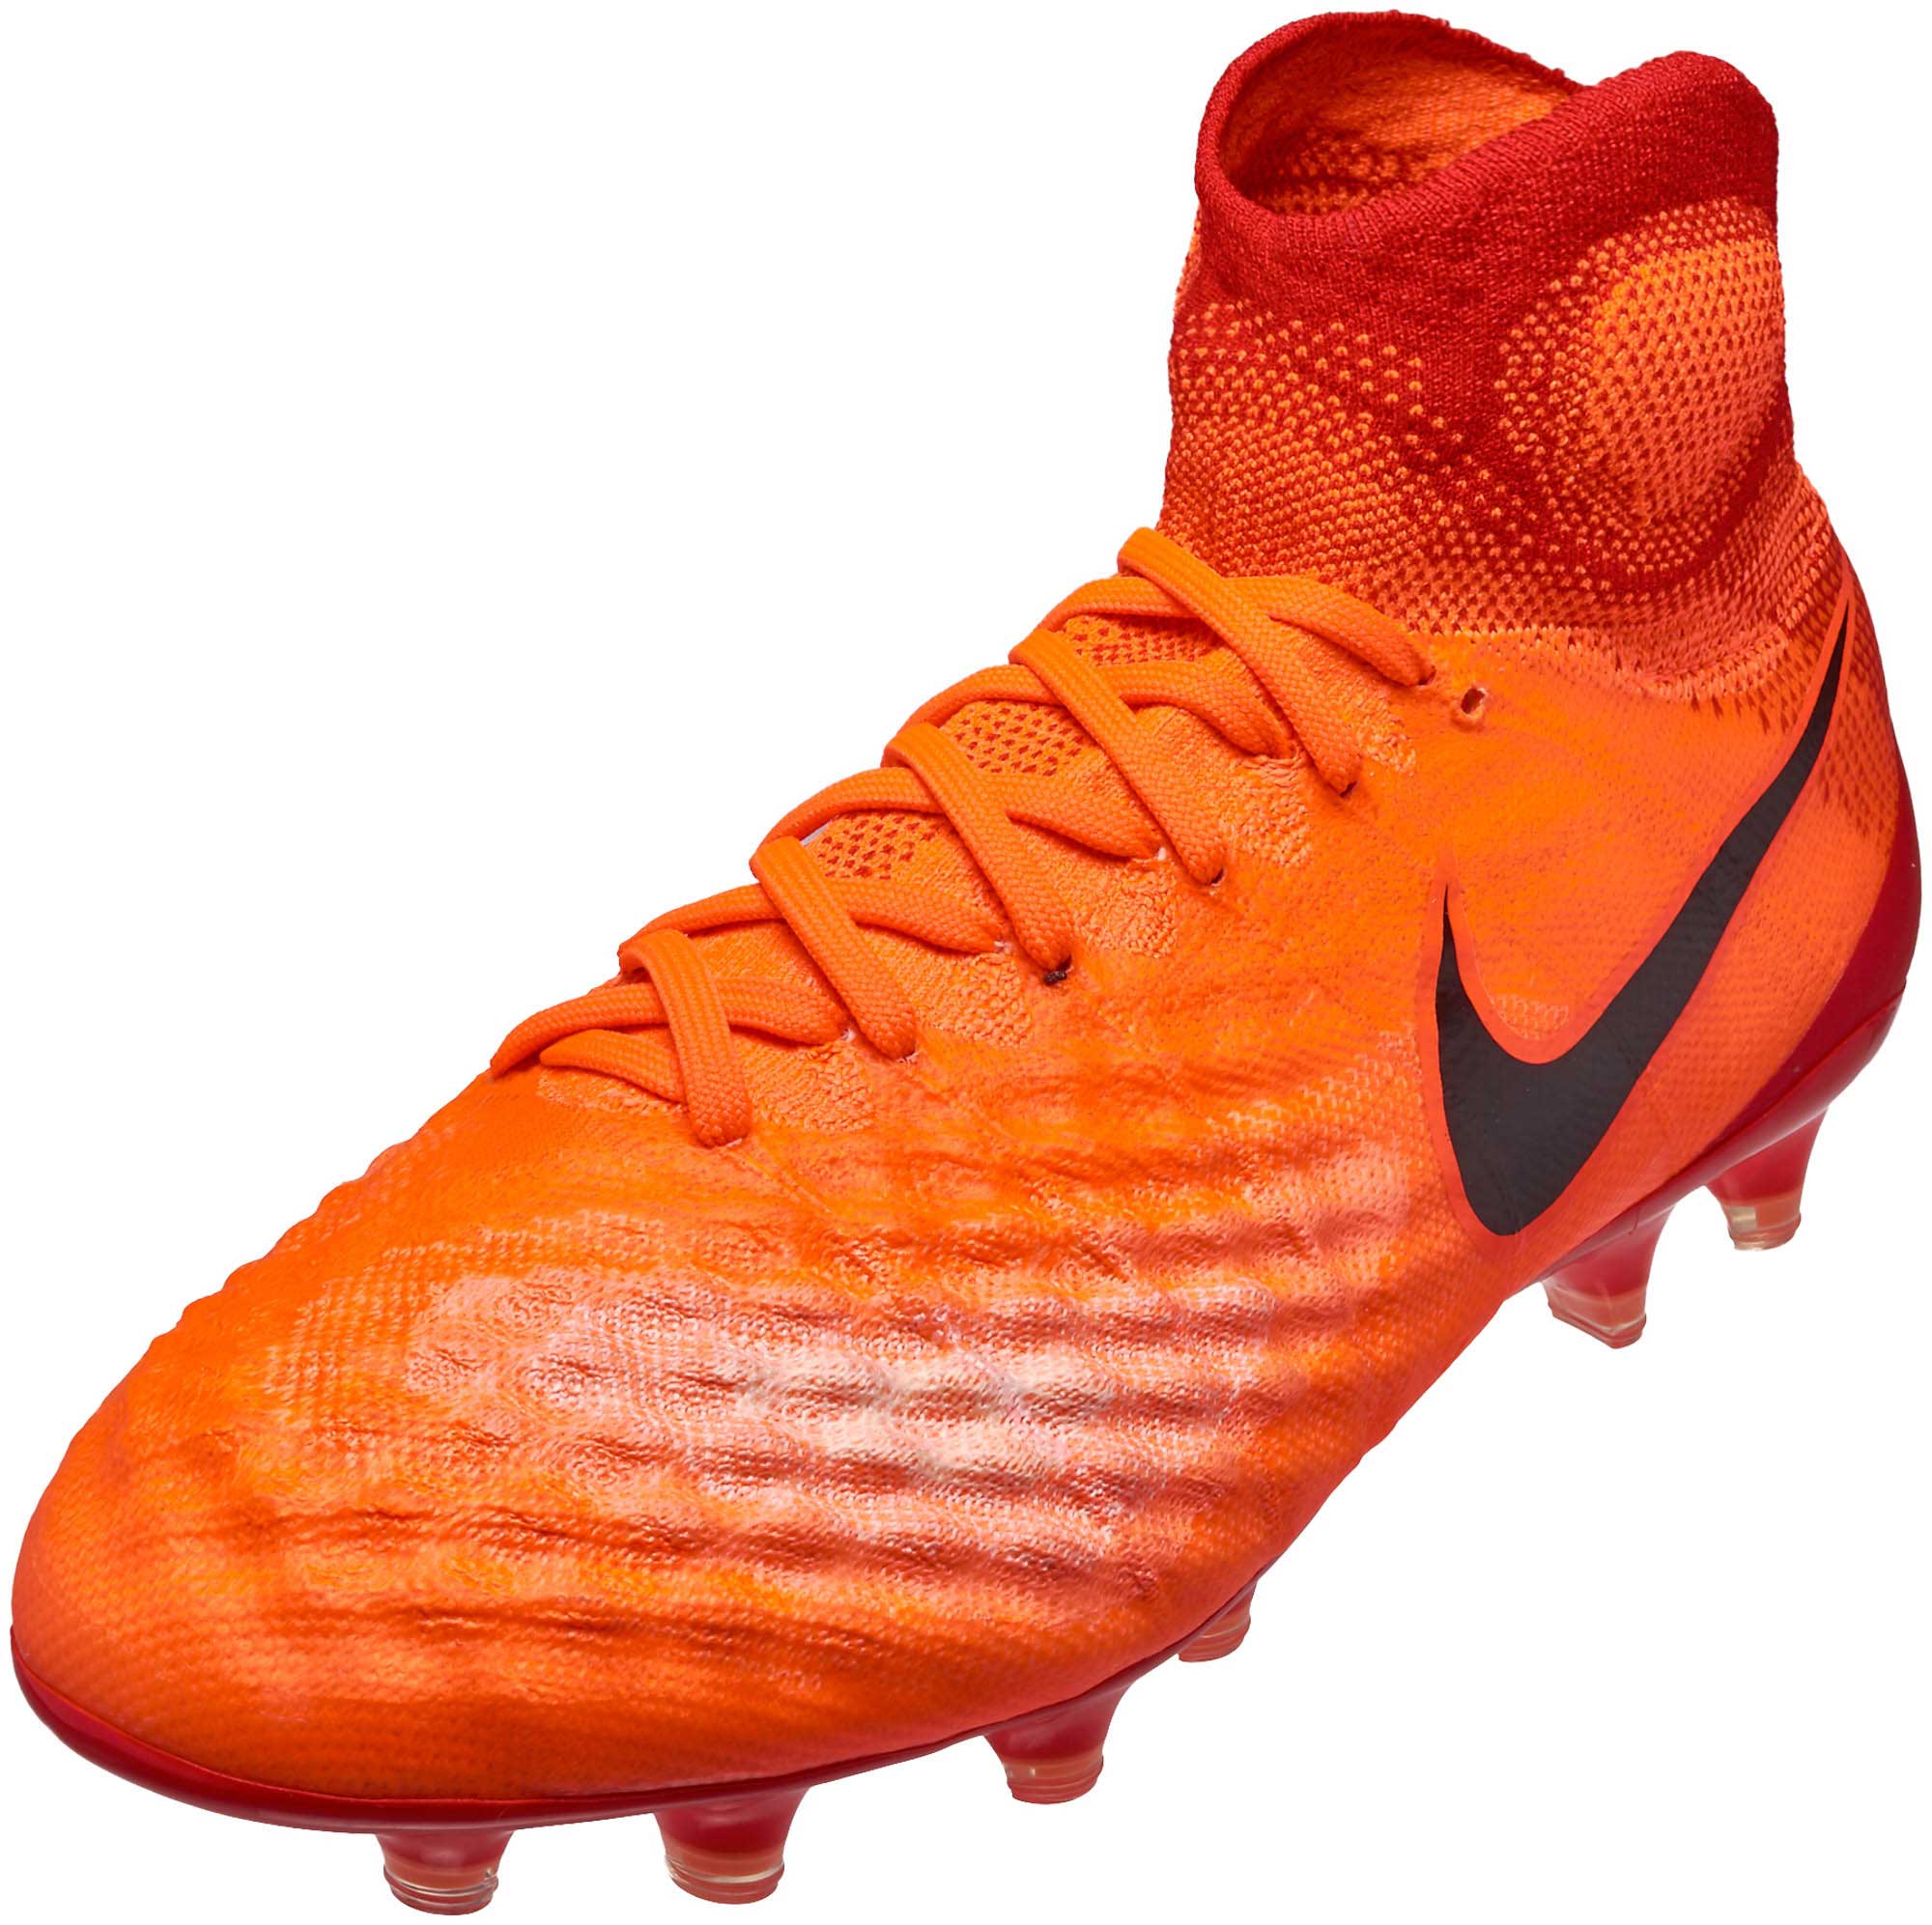 red nike magista